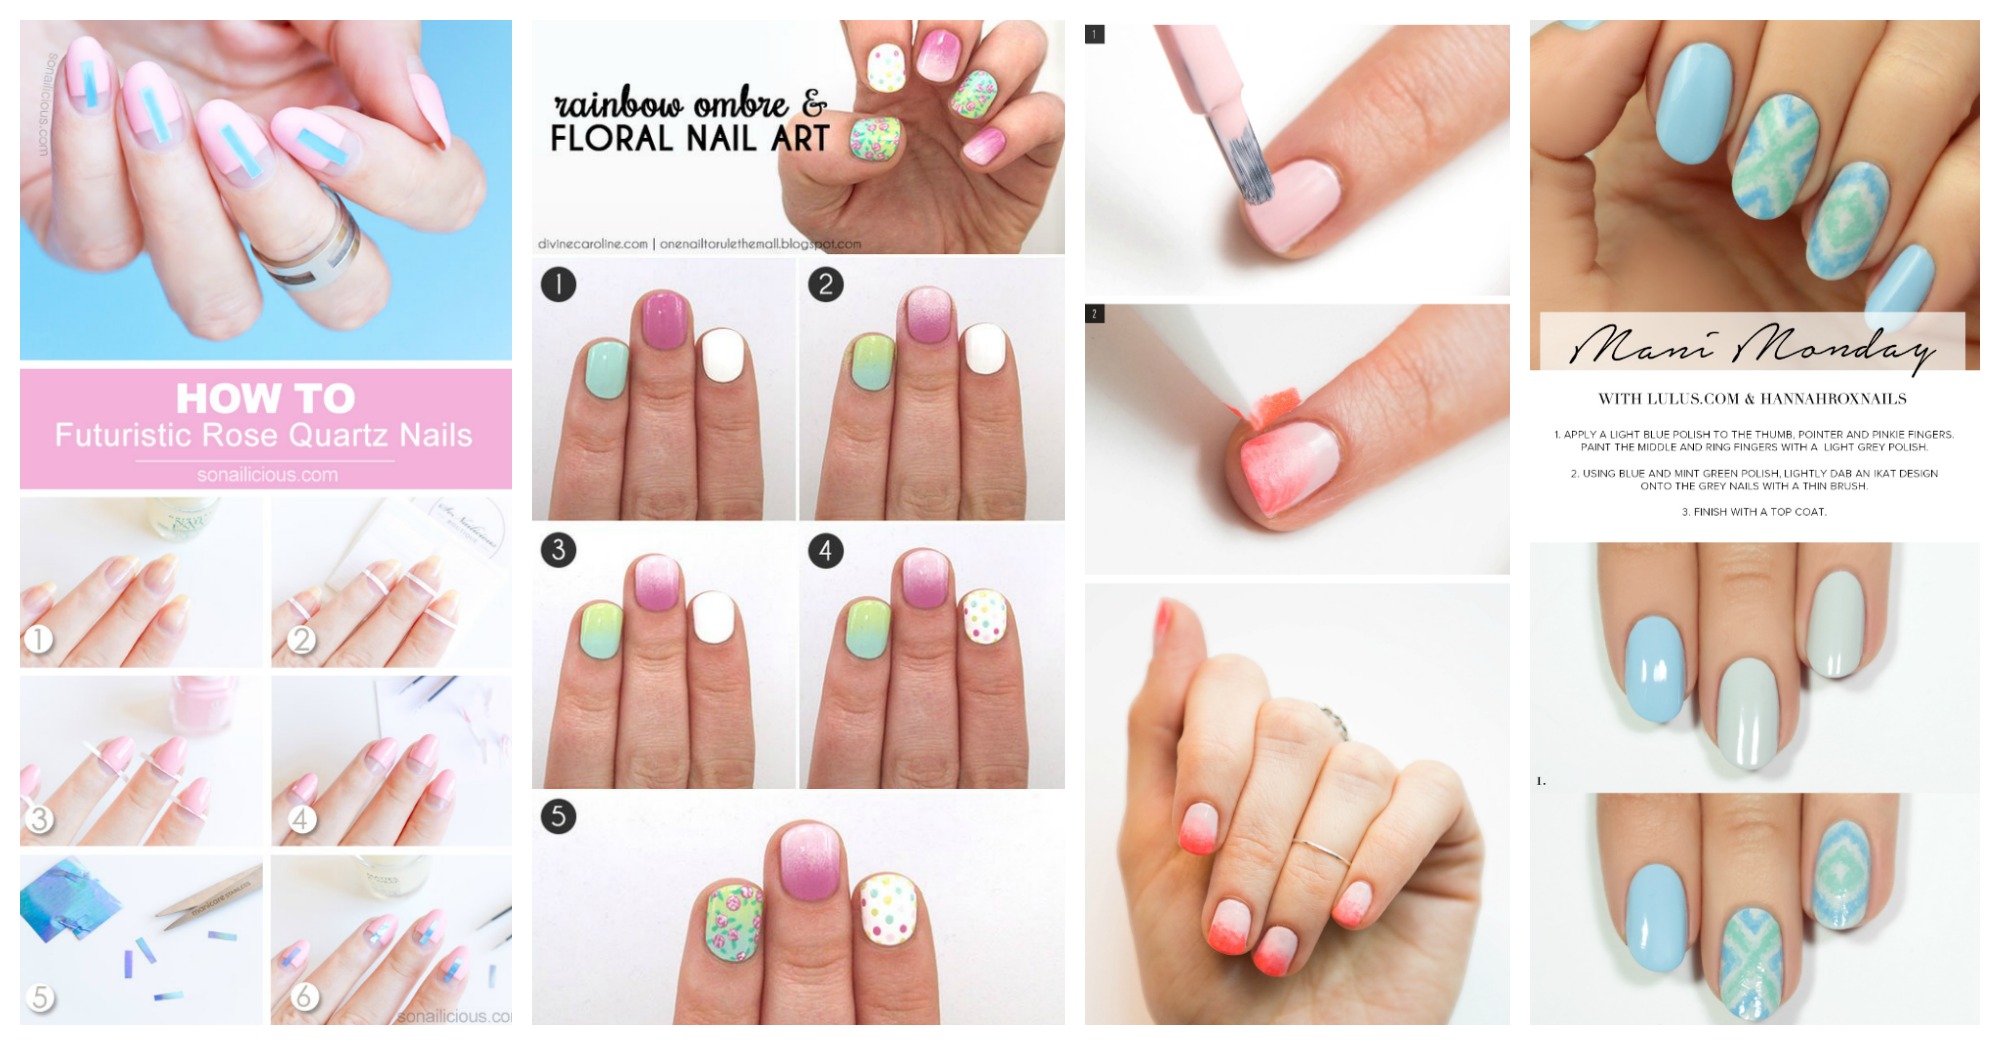 5. Step-by-Step Nail Design Tutorials for At-Home Manicures - wide 3